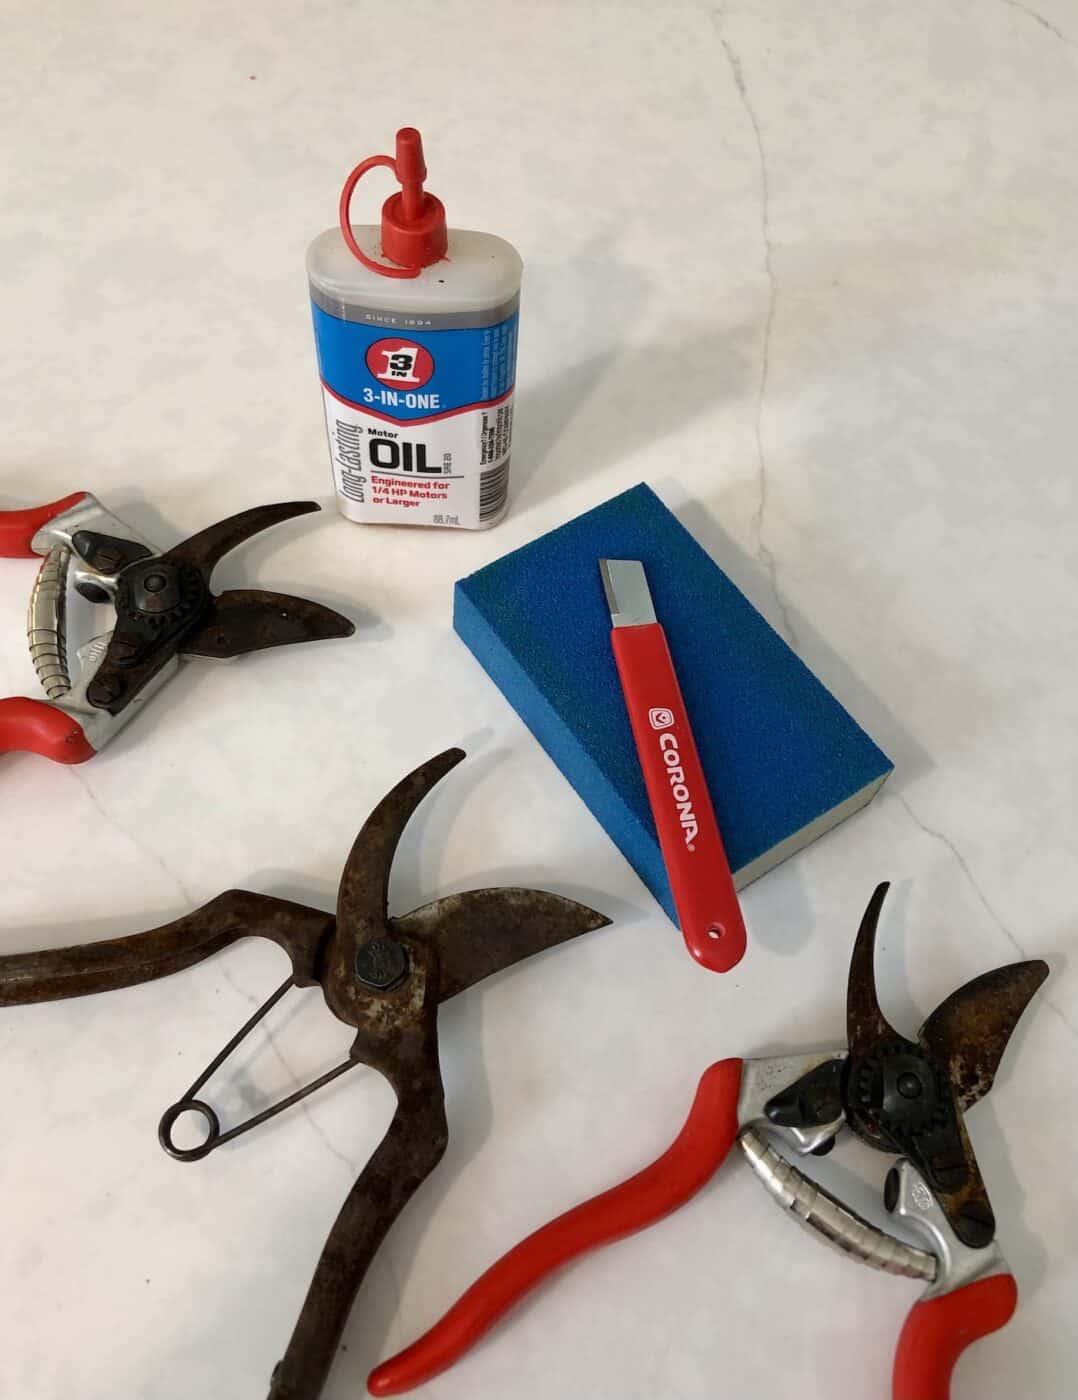 Supplies for sharpening pruning shears